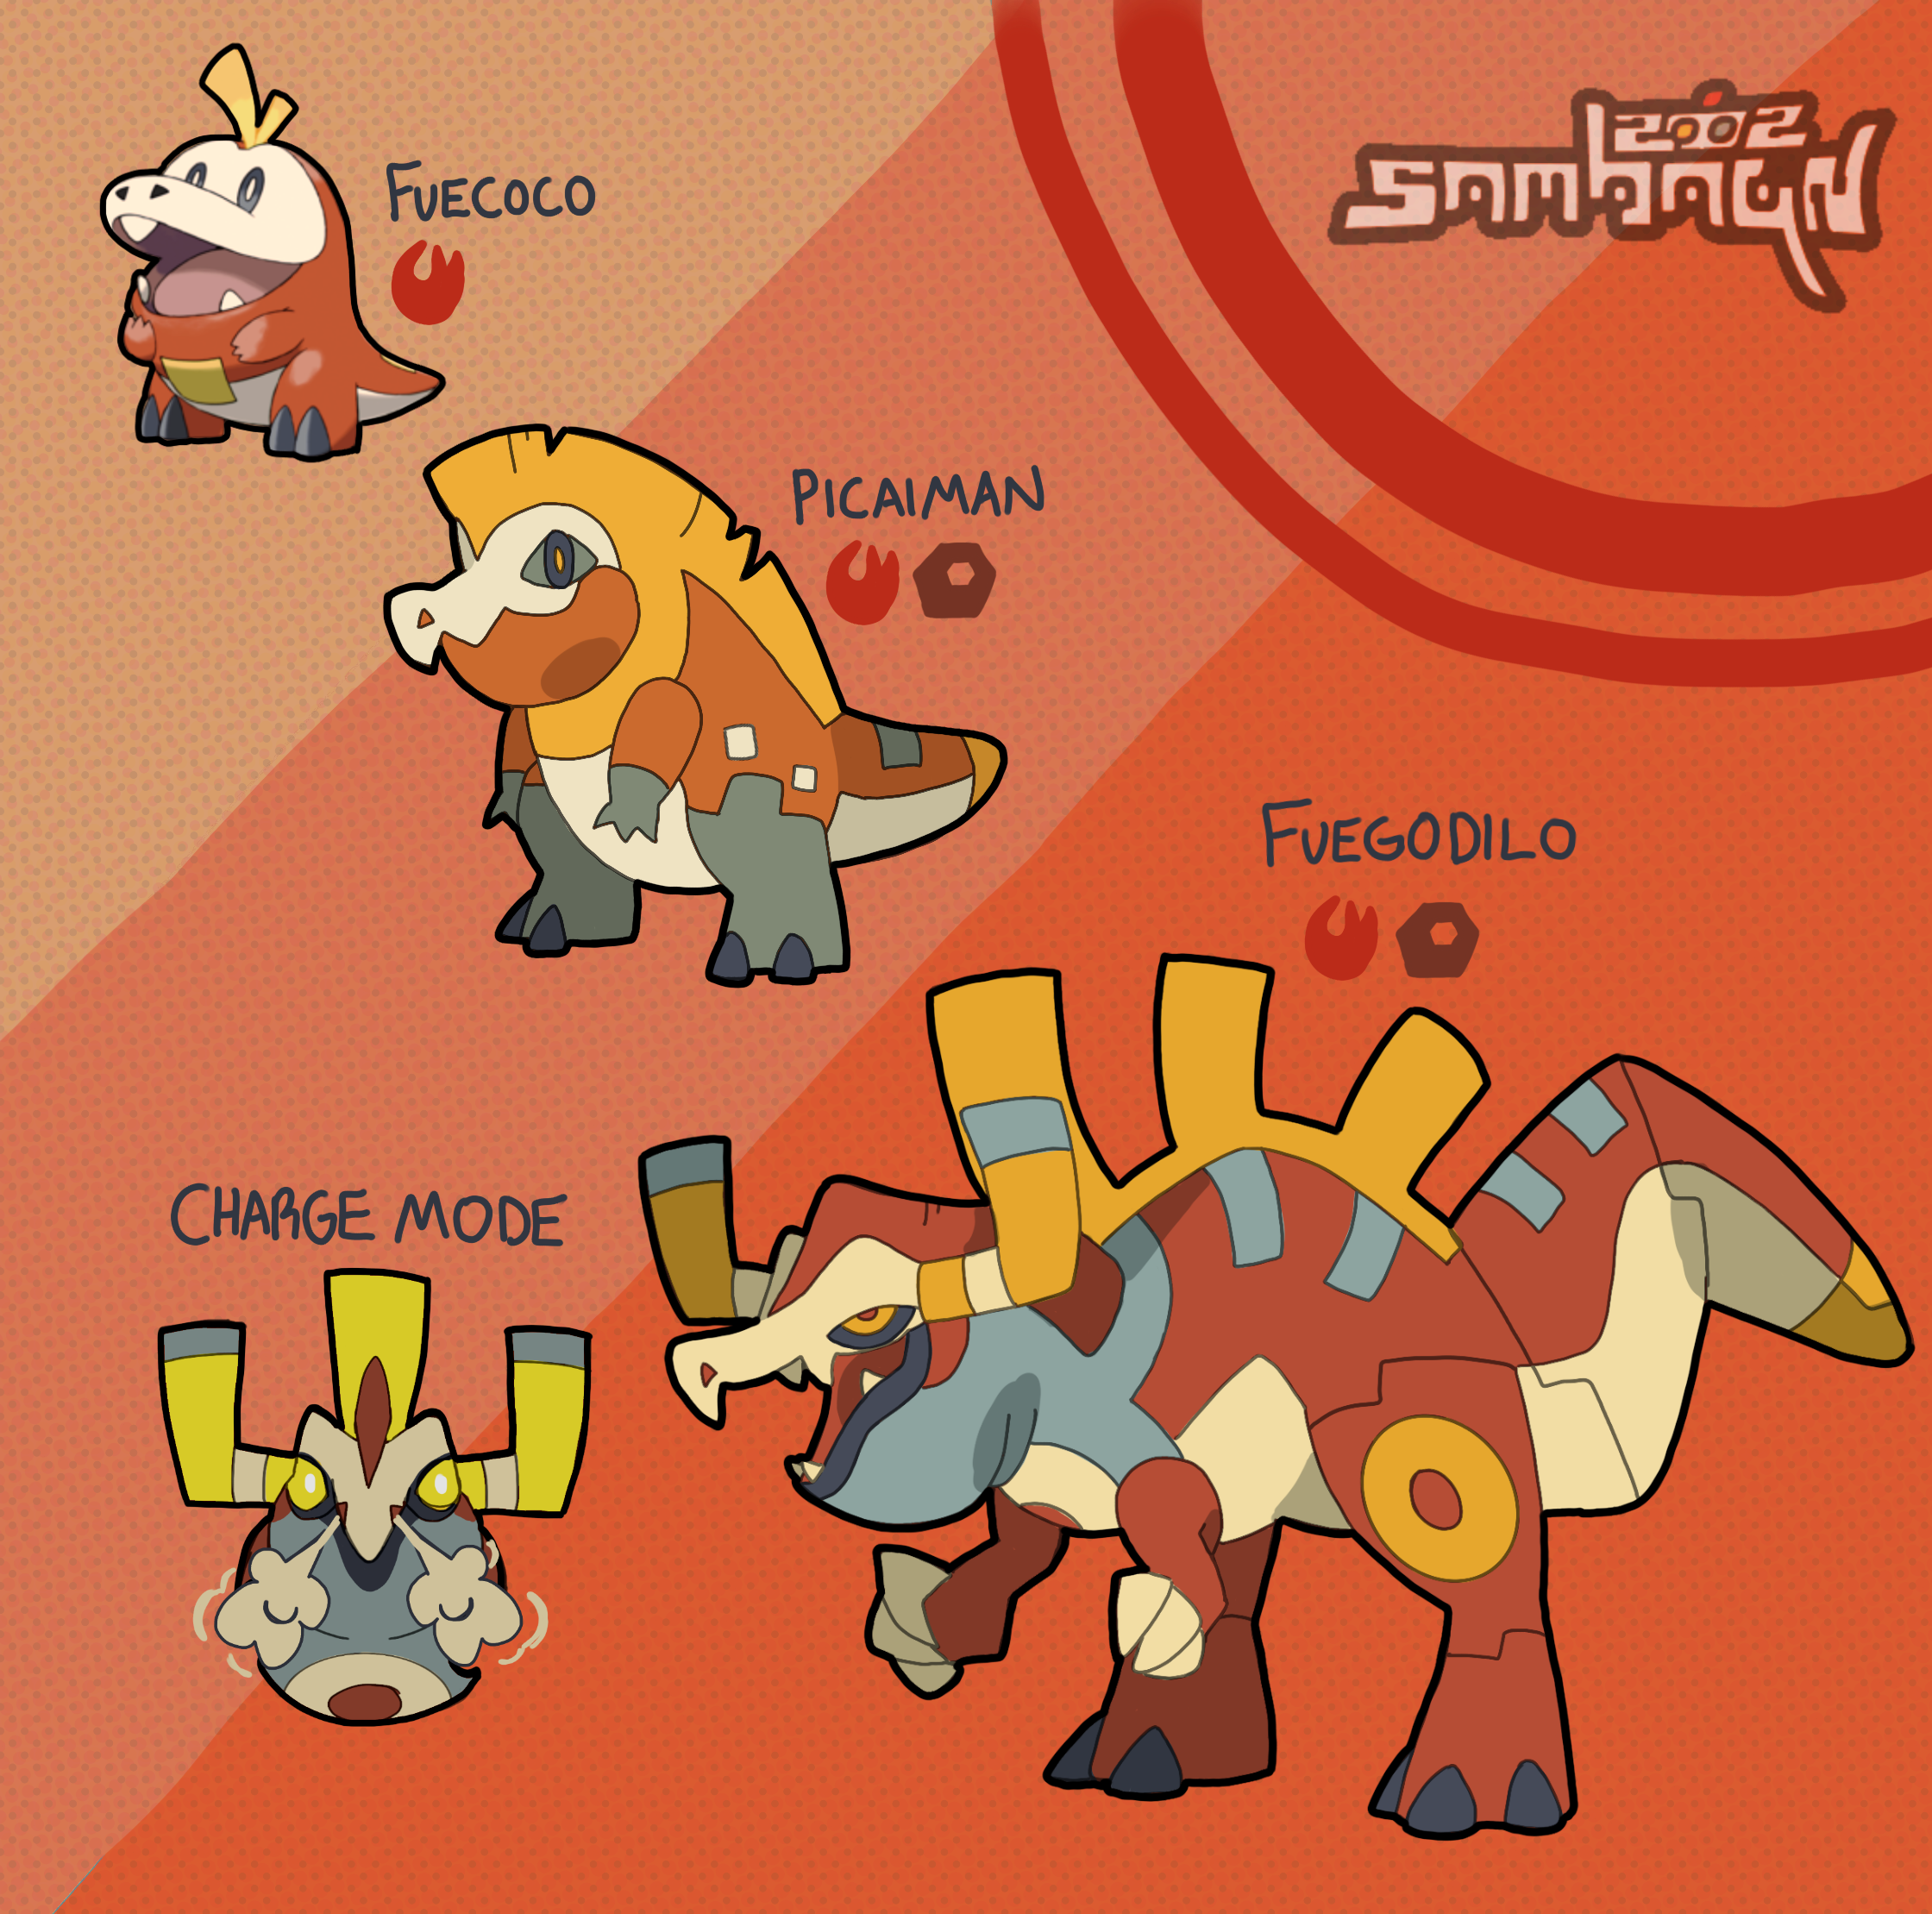 I created these designs before the real evolutions of the pokemon Fuecoco were revealed. I expanded its fire-type motif into a fire/ground or steel dinosaur/bull/segmented dinosaur toy thing. Done in 2022.